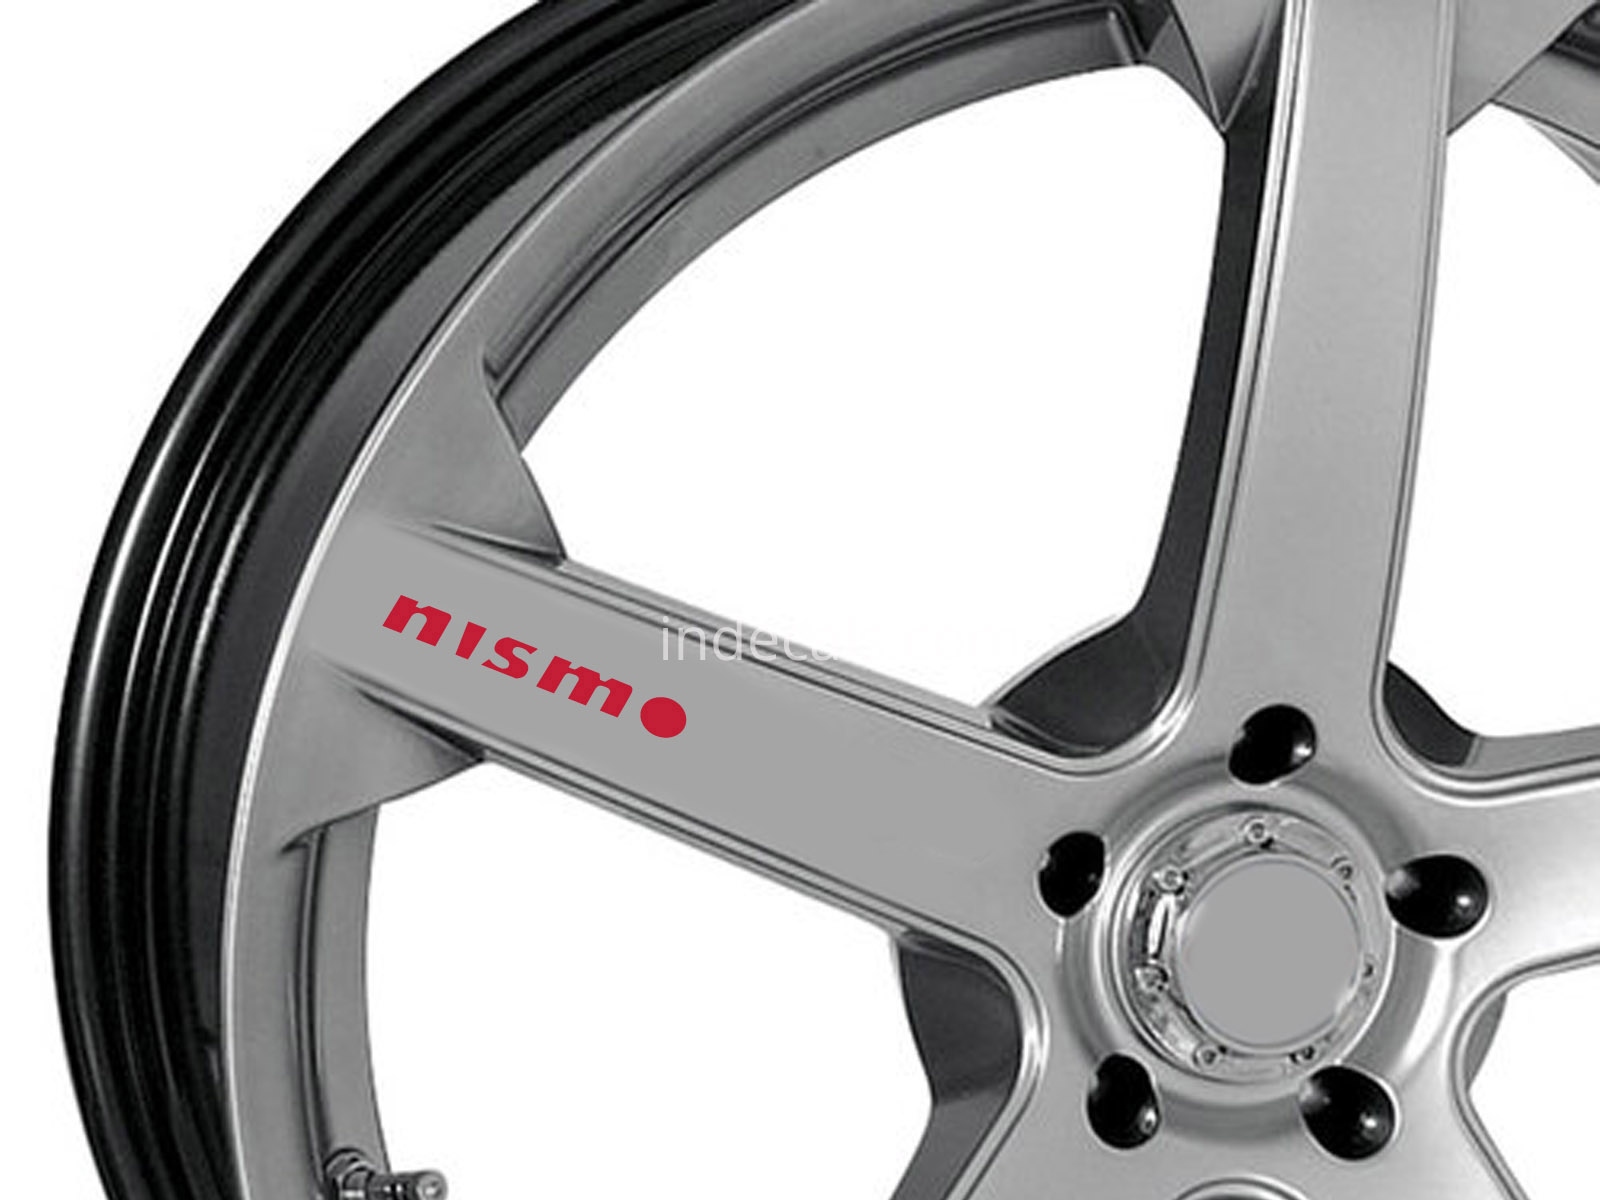 6 x Nismo Stickers for Wheels - Red